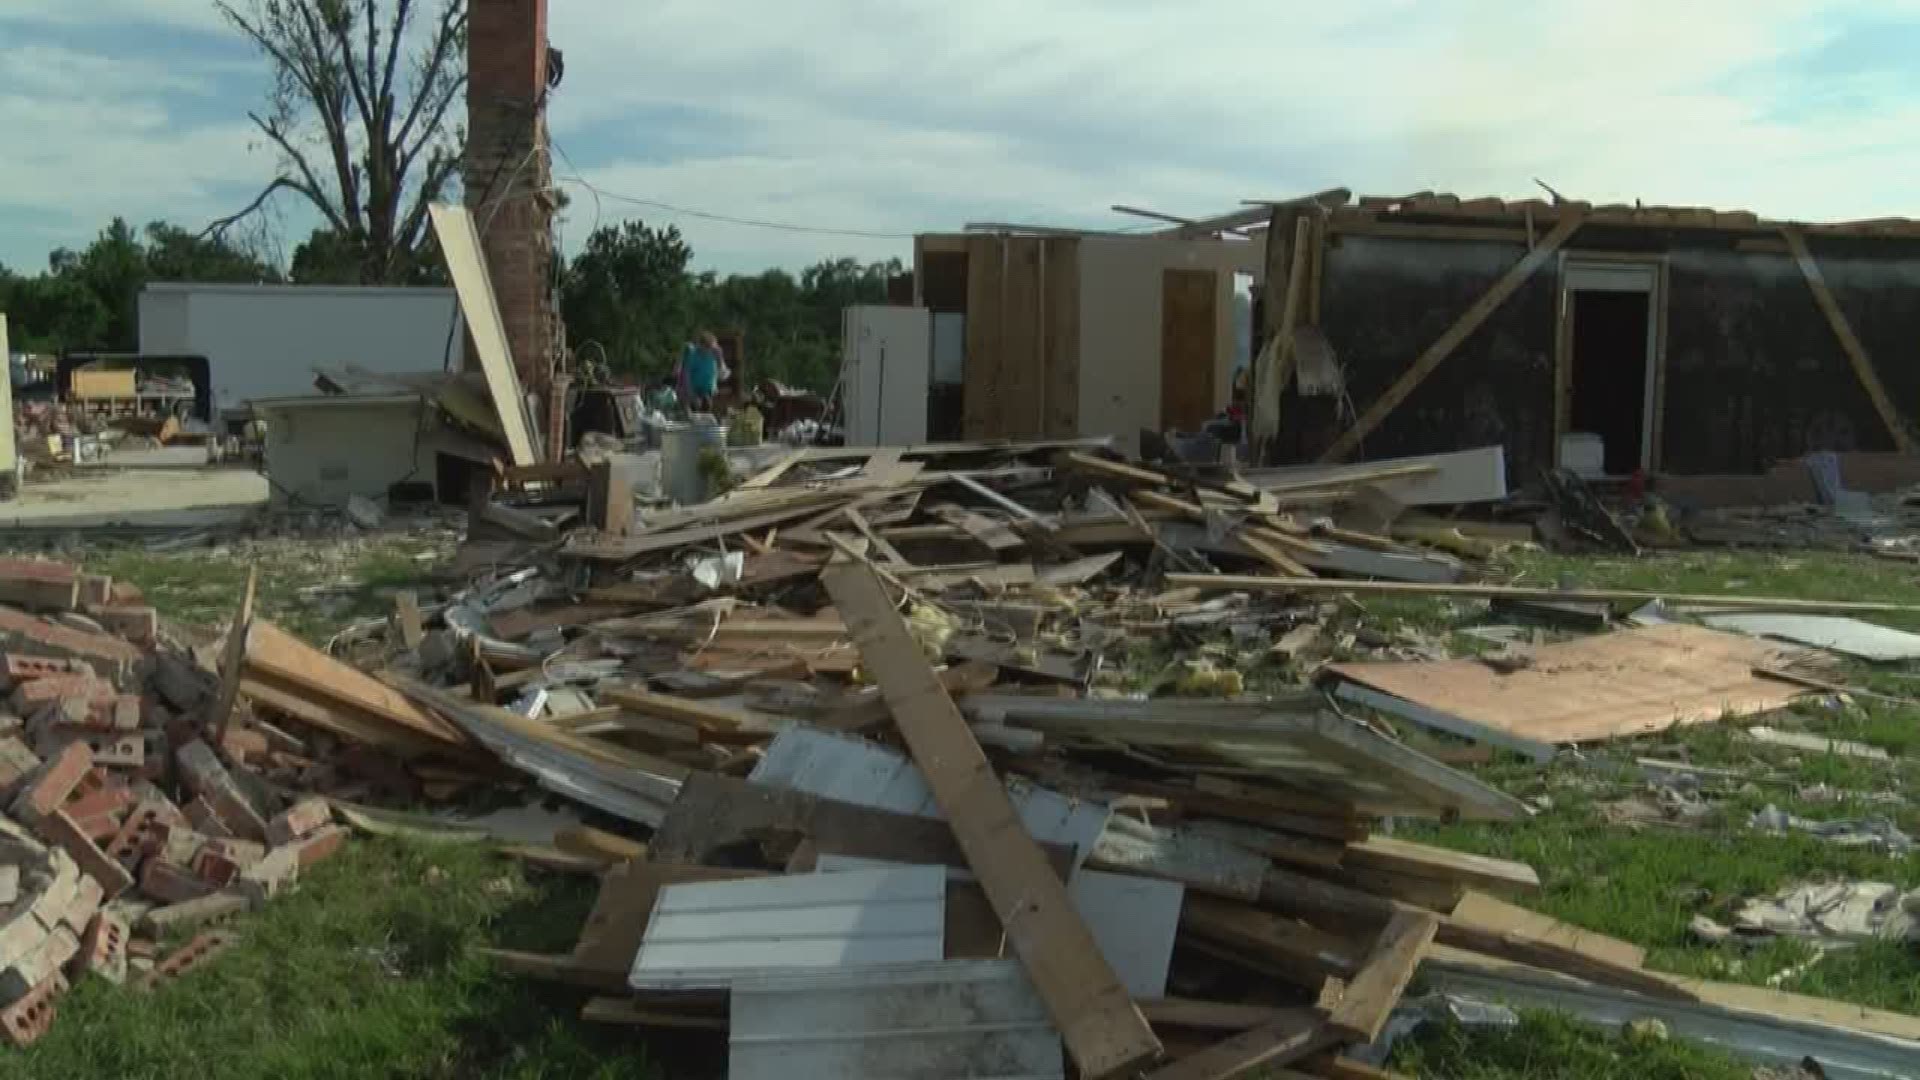 The work has only begun for East Texas residents affected by Saturday's devastating tornadoes, as homeowners in Emory start to rebuild.